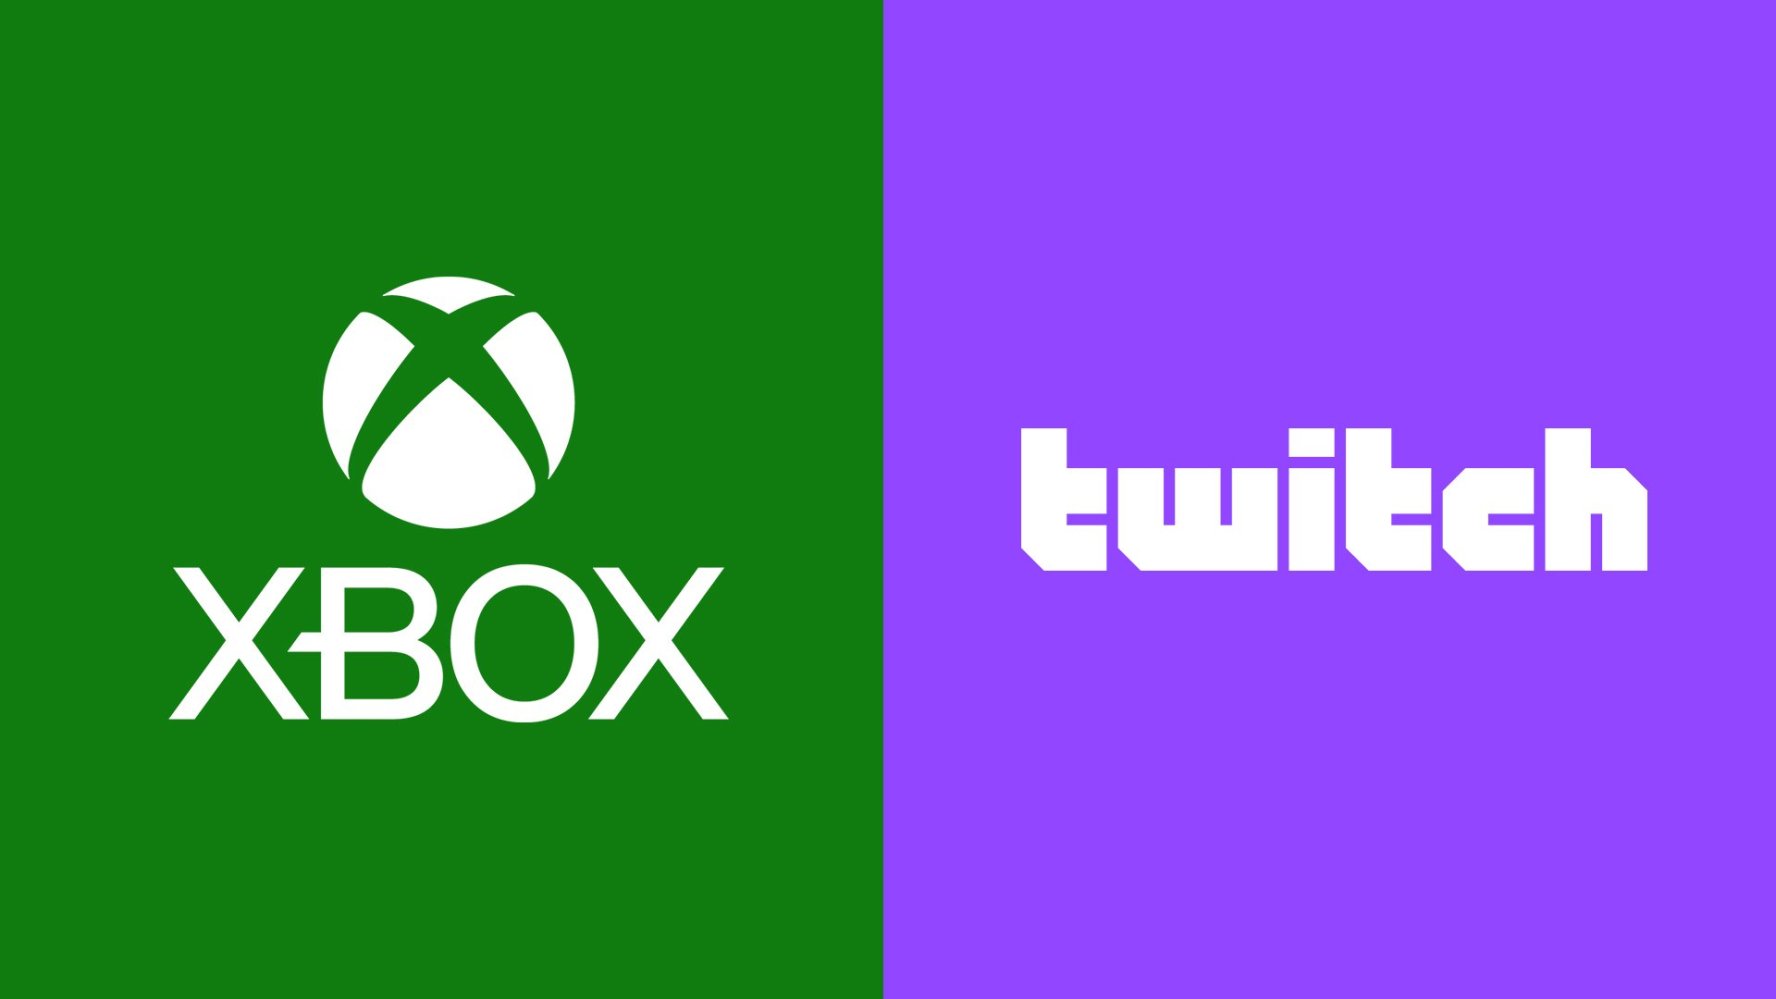 You Can Now Twitch Stream From the Xbox Dashboard